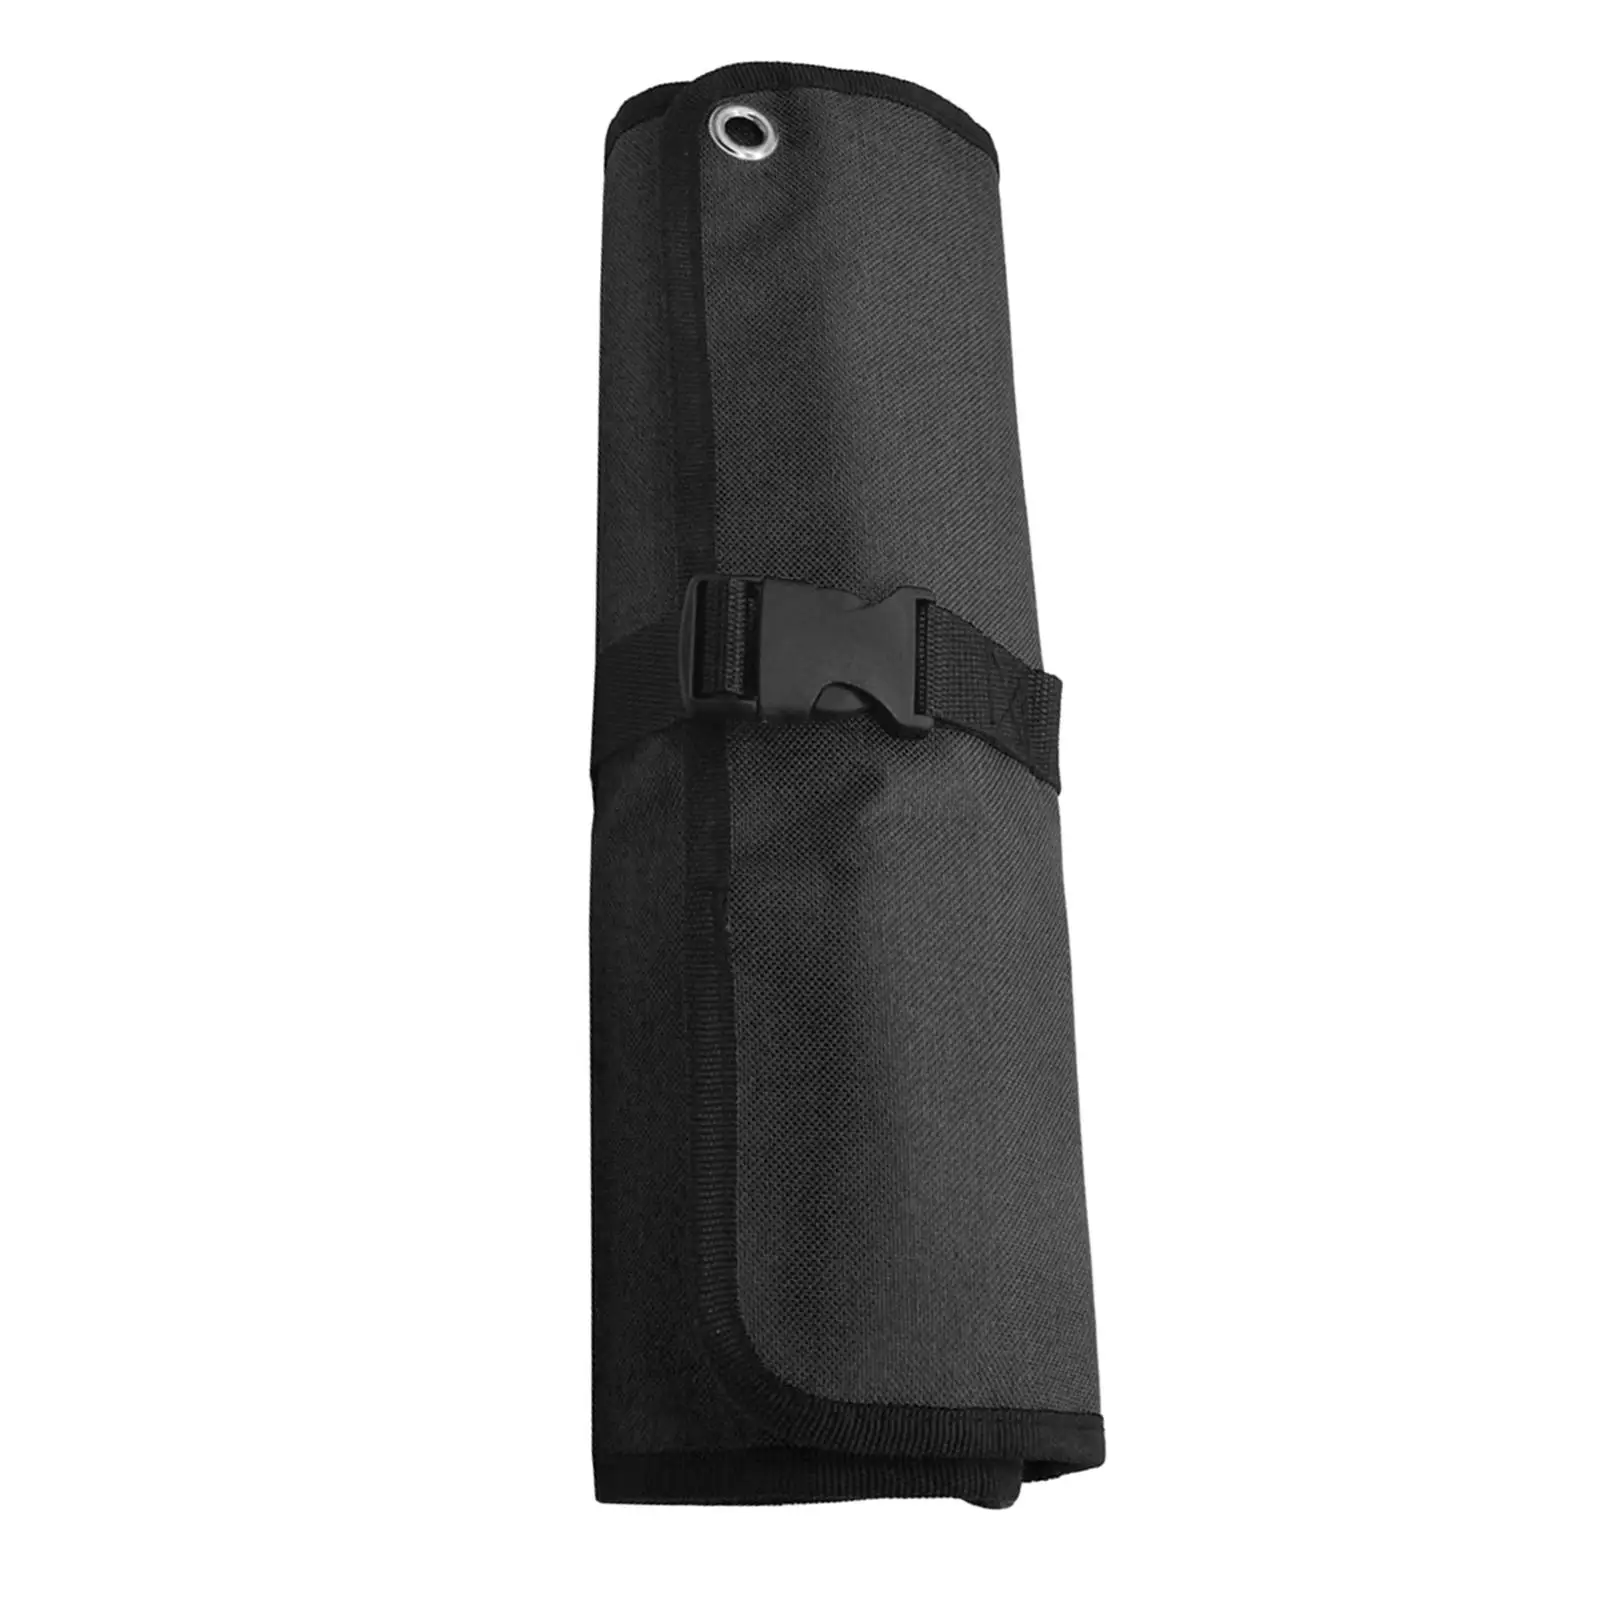 Motorcycle Repair Tool Roll Tool Pouch Rolling Tool Bag 600D Oxford Cloth Organizer Holder for Plumbers Electricians Garden